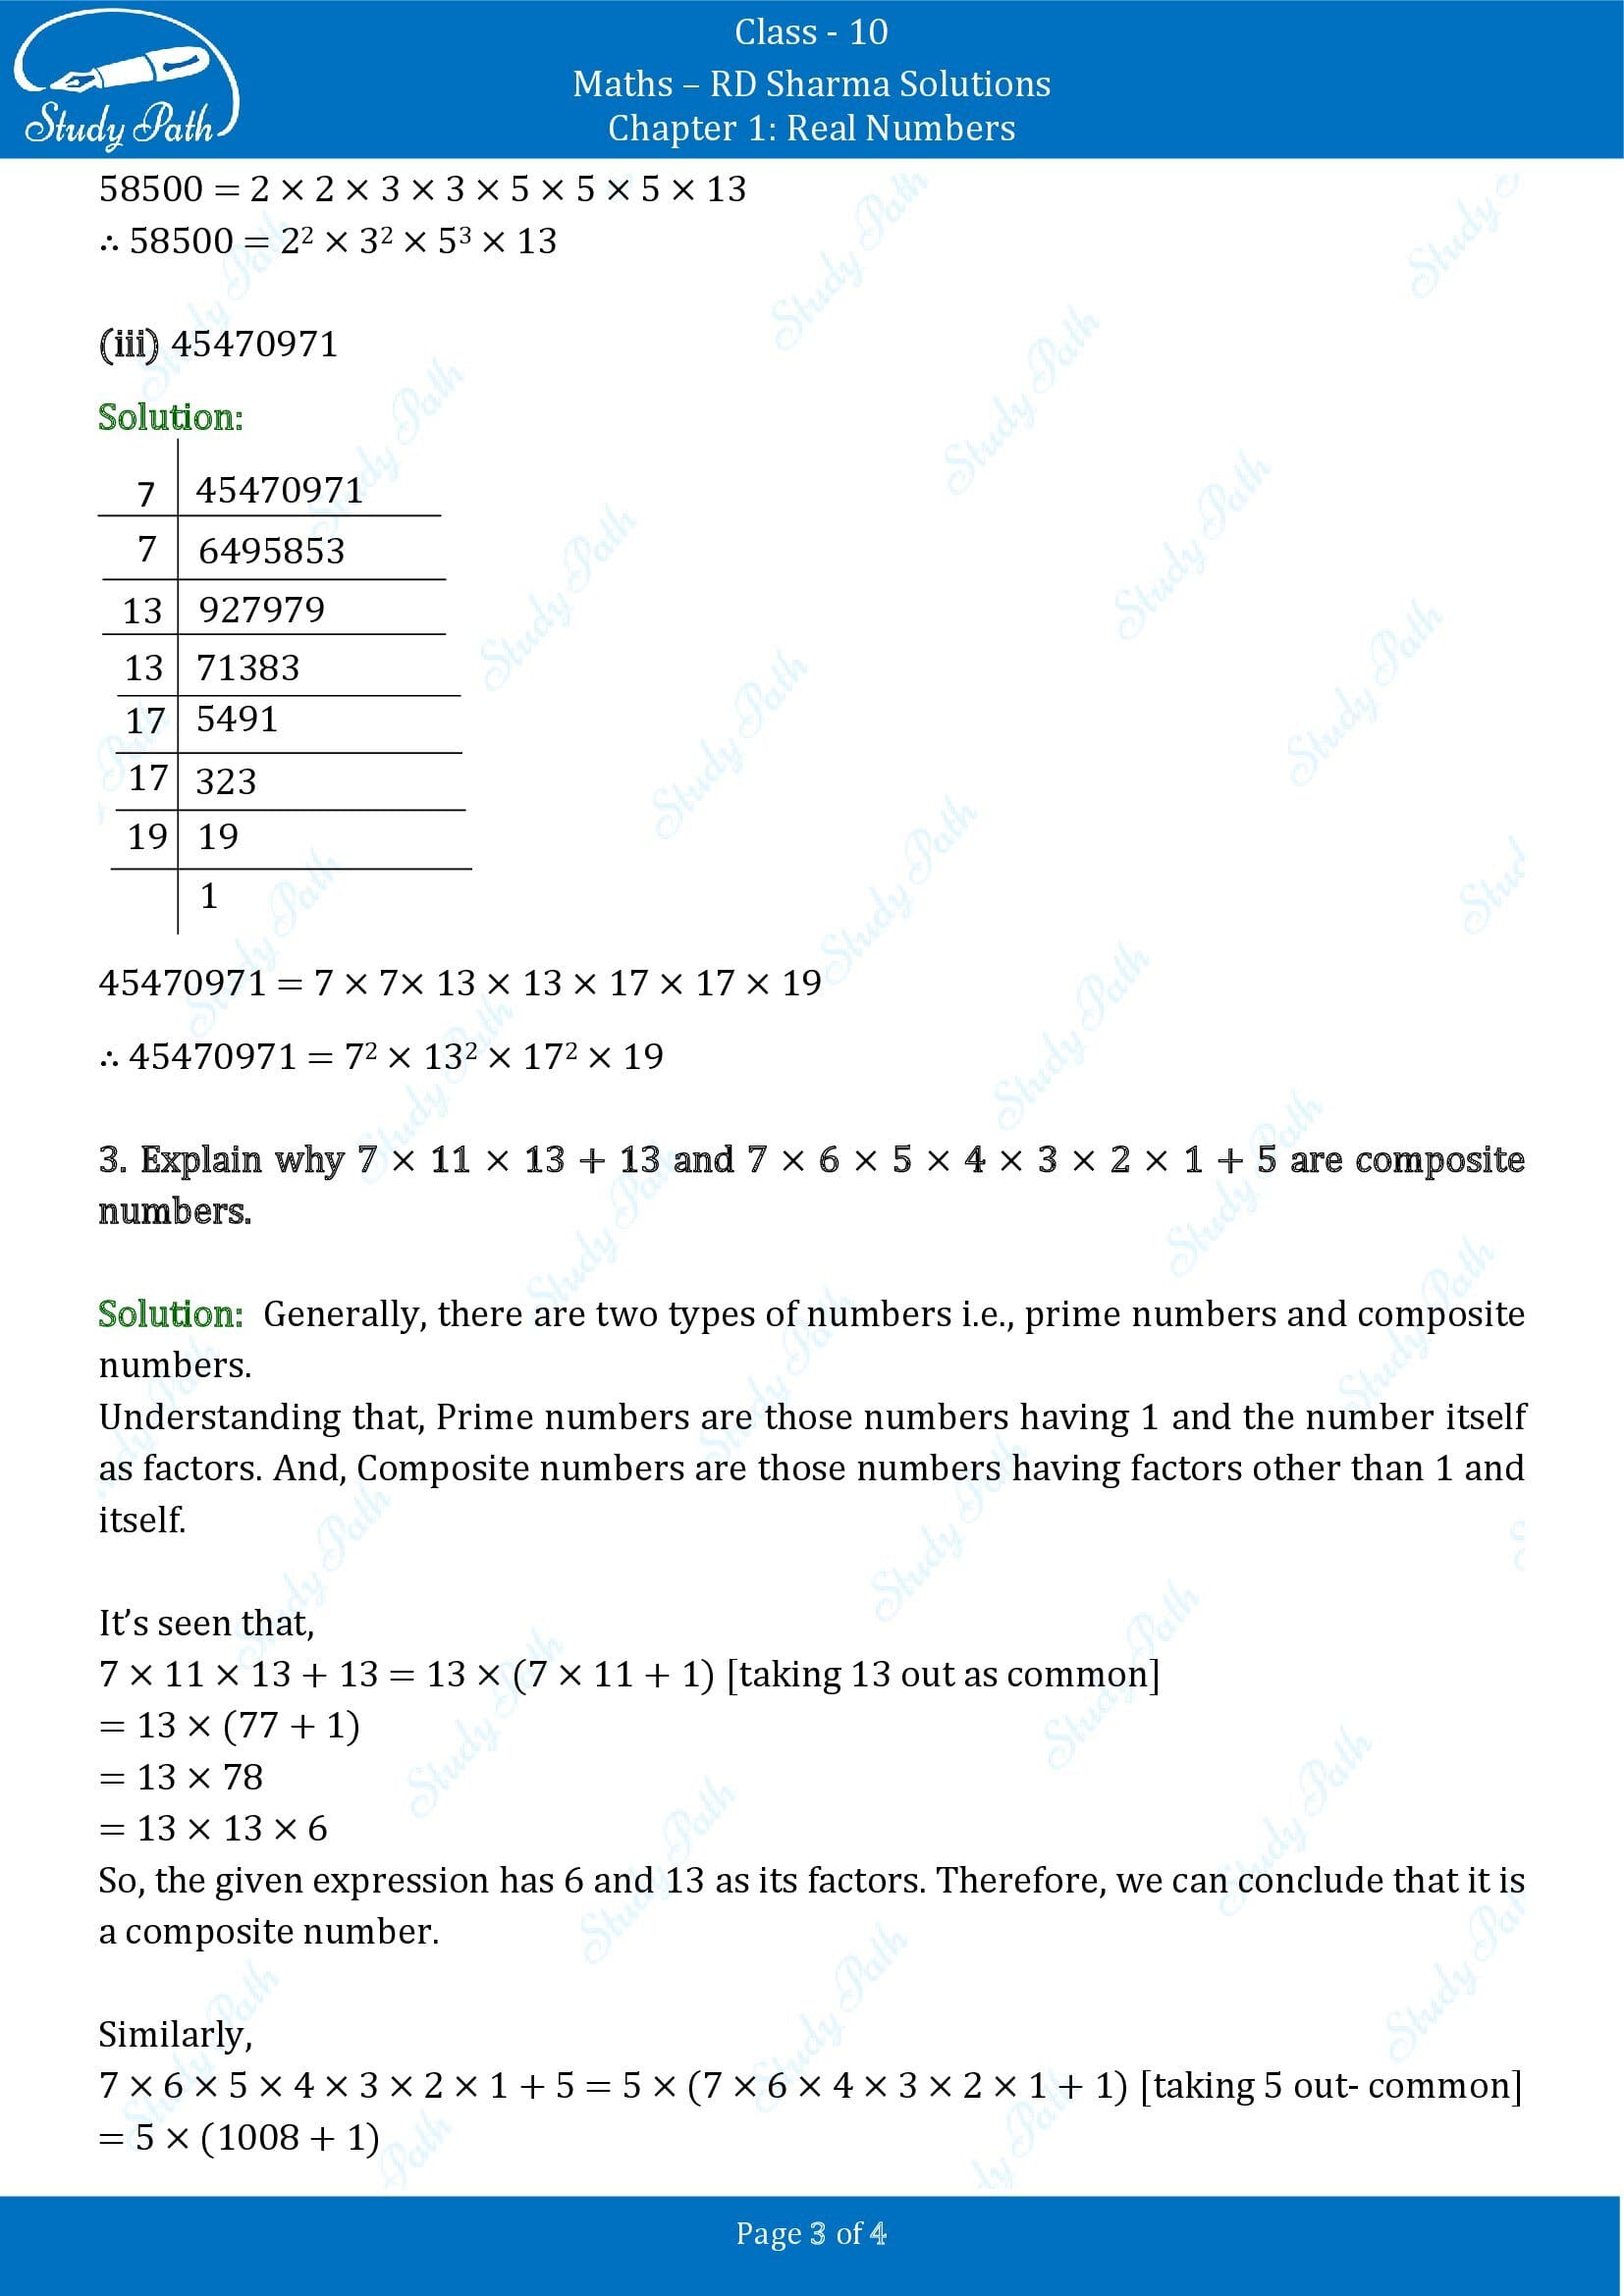 RD Sharma Solutions Class 10 Chapter 1 Real Numbers Exercise 1.3 00003